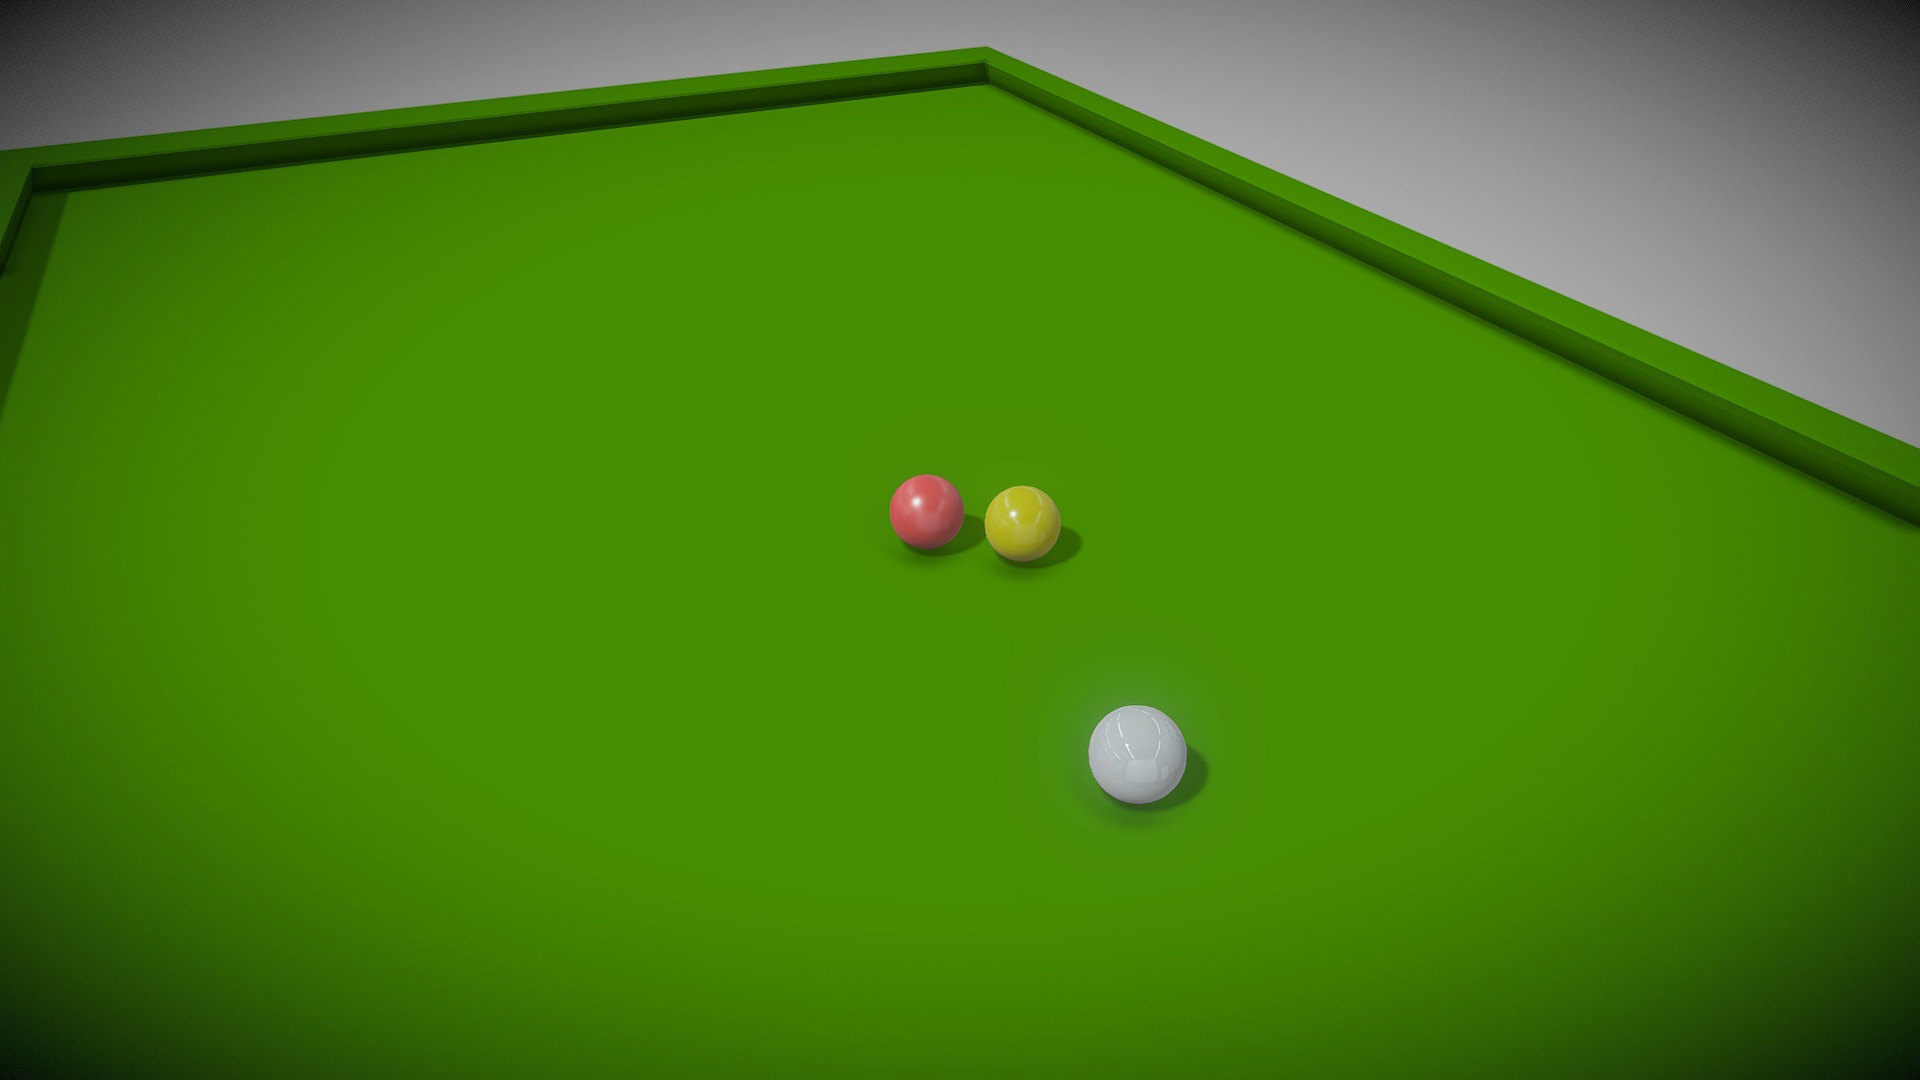 3D model December 16: physics - This is a 3D model of the December 16: physics. The 3D model is about a group of balls on a green surface.